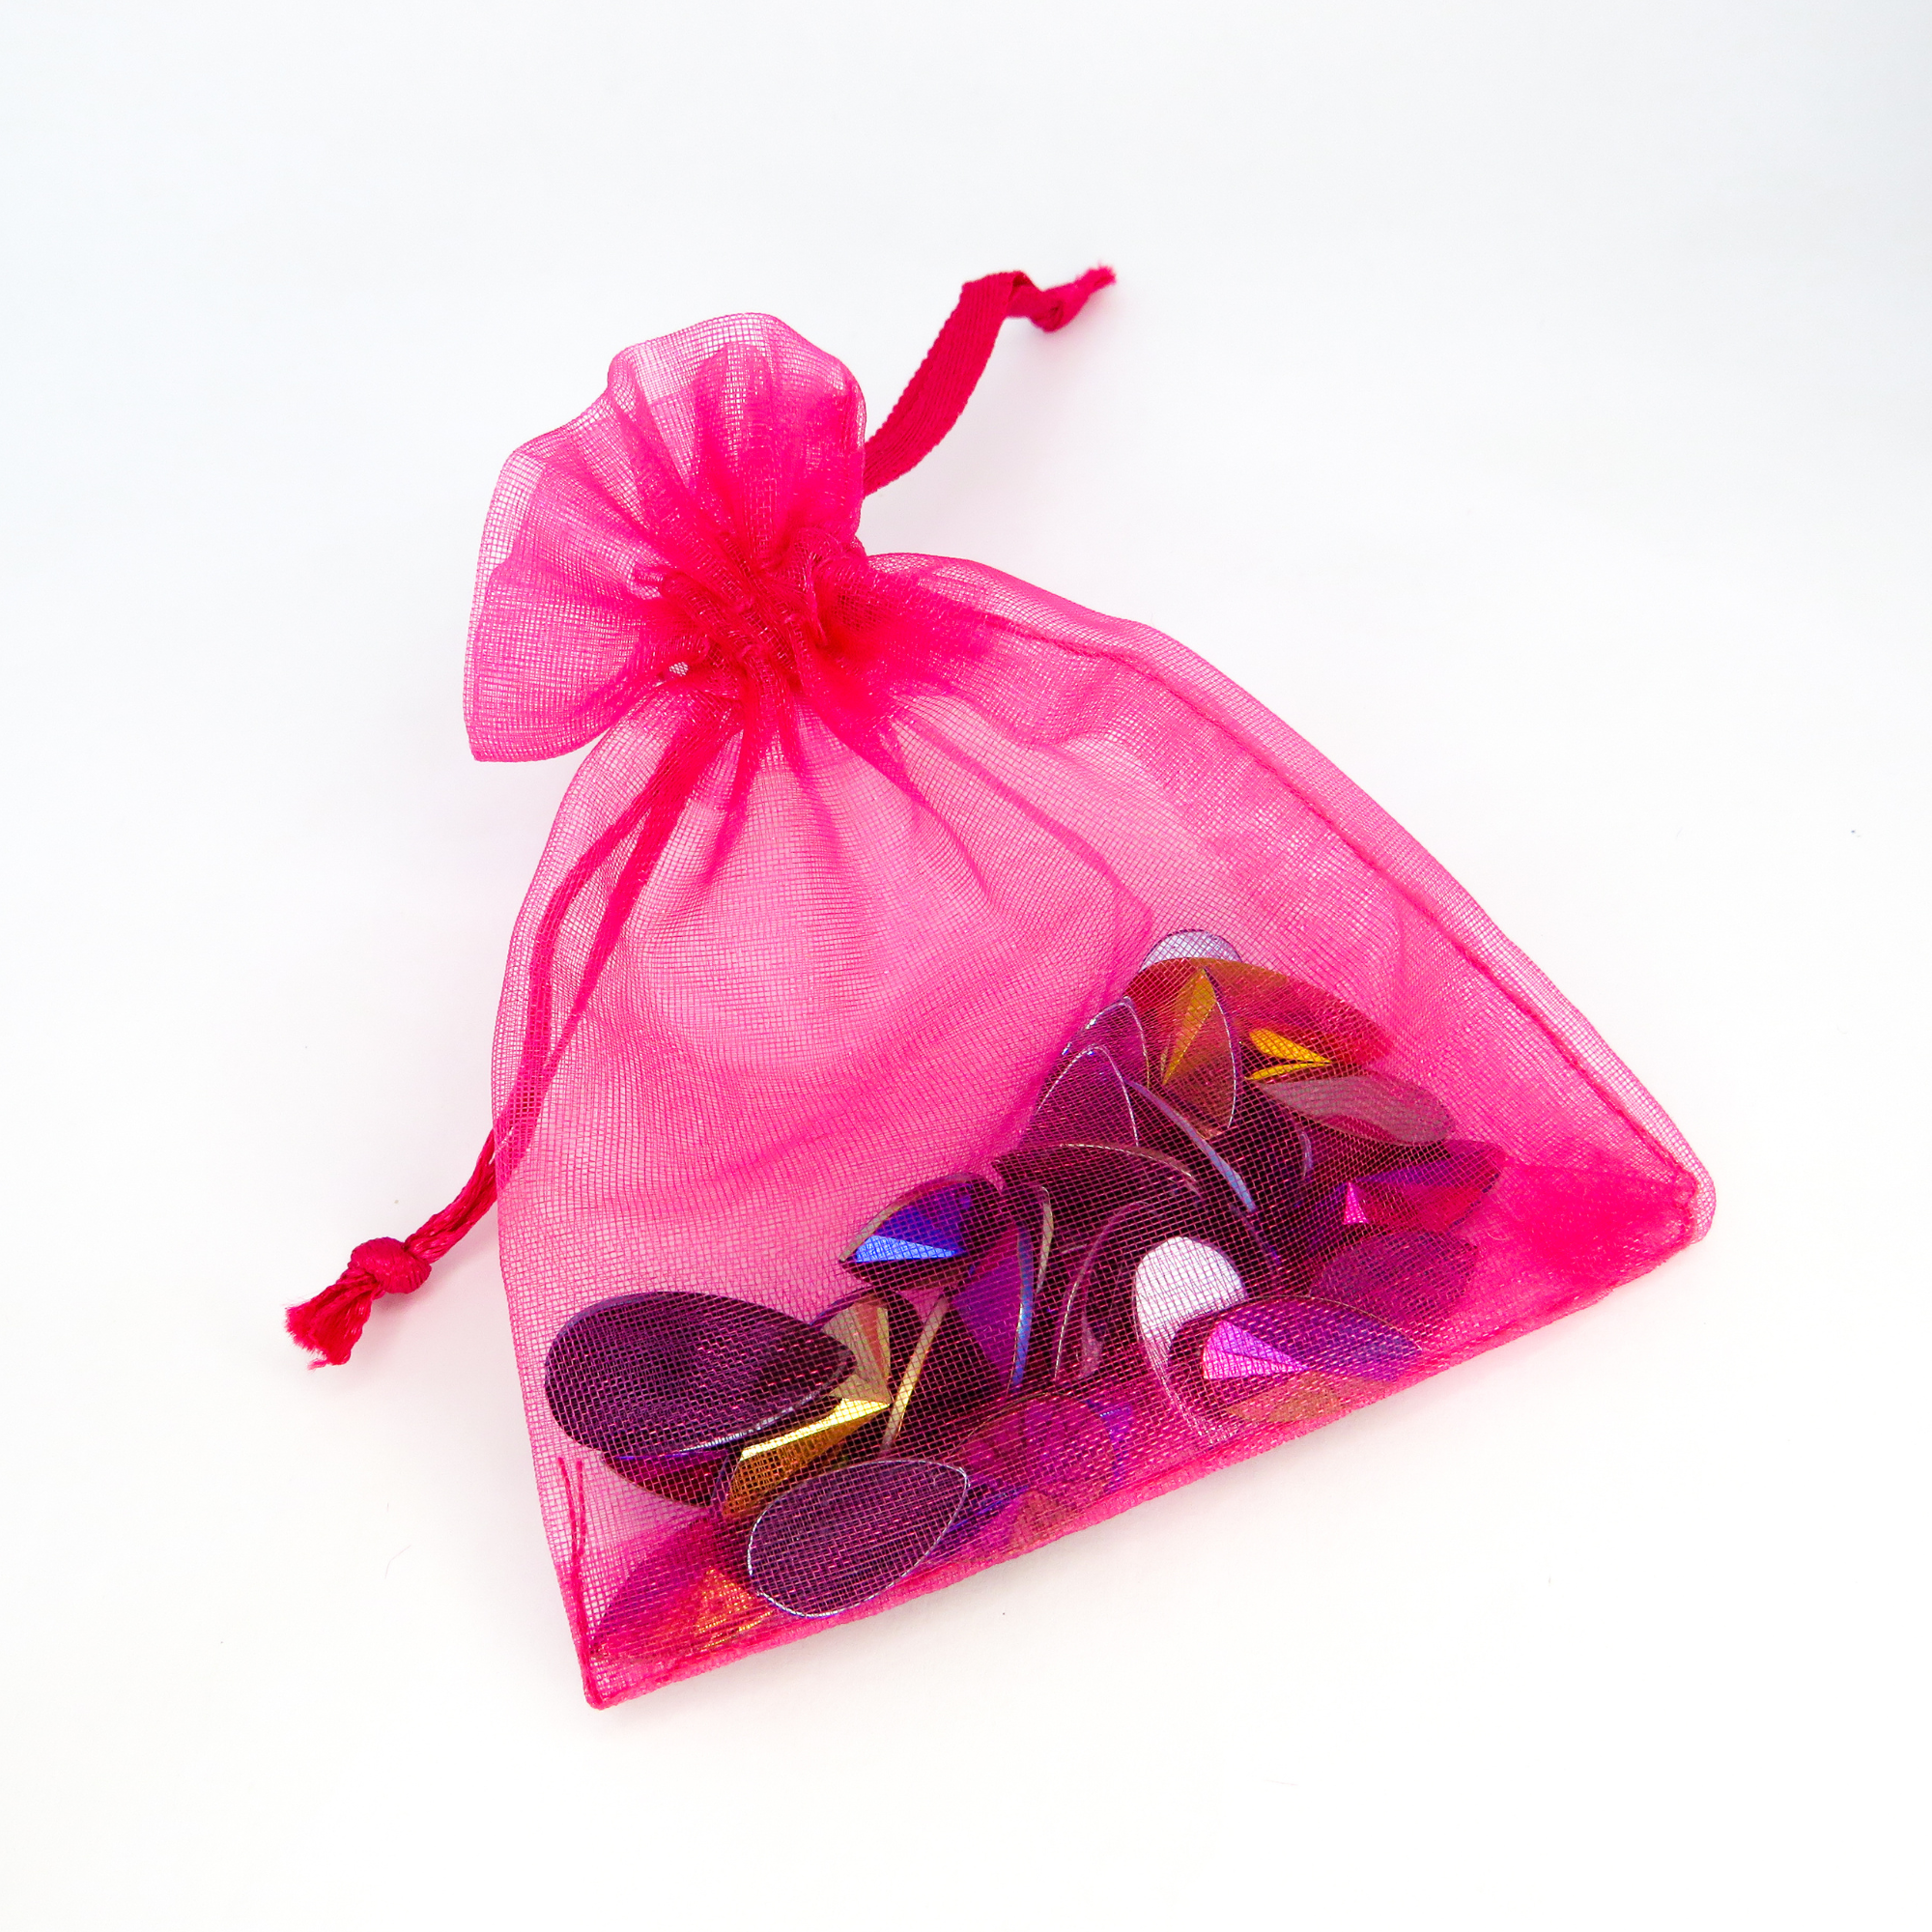 Maverick reusable festival face and body gems by Luminosity Glitter in a mini hot pink organza bag to keep them safe after use